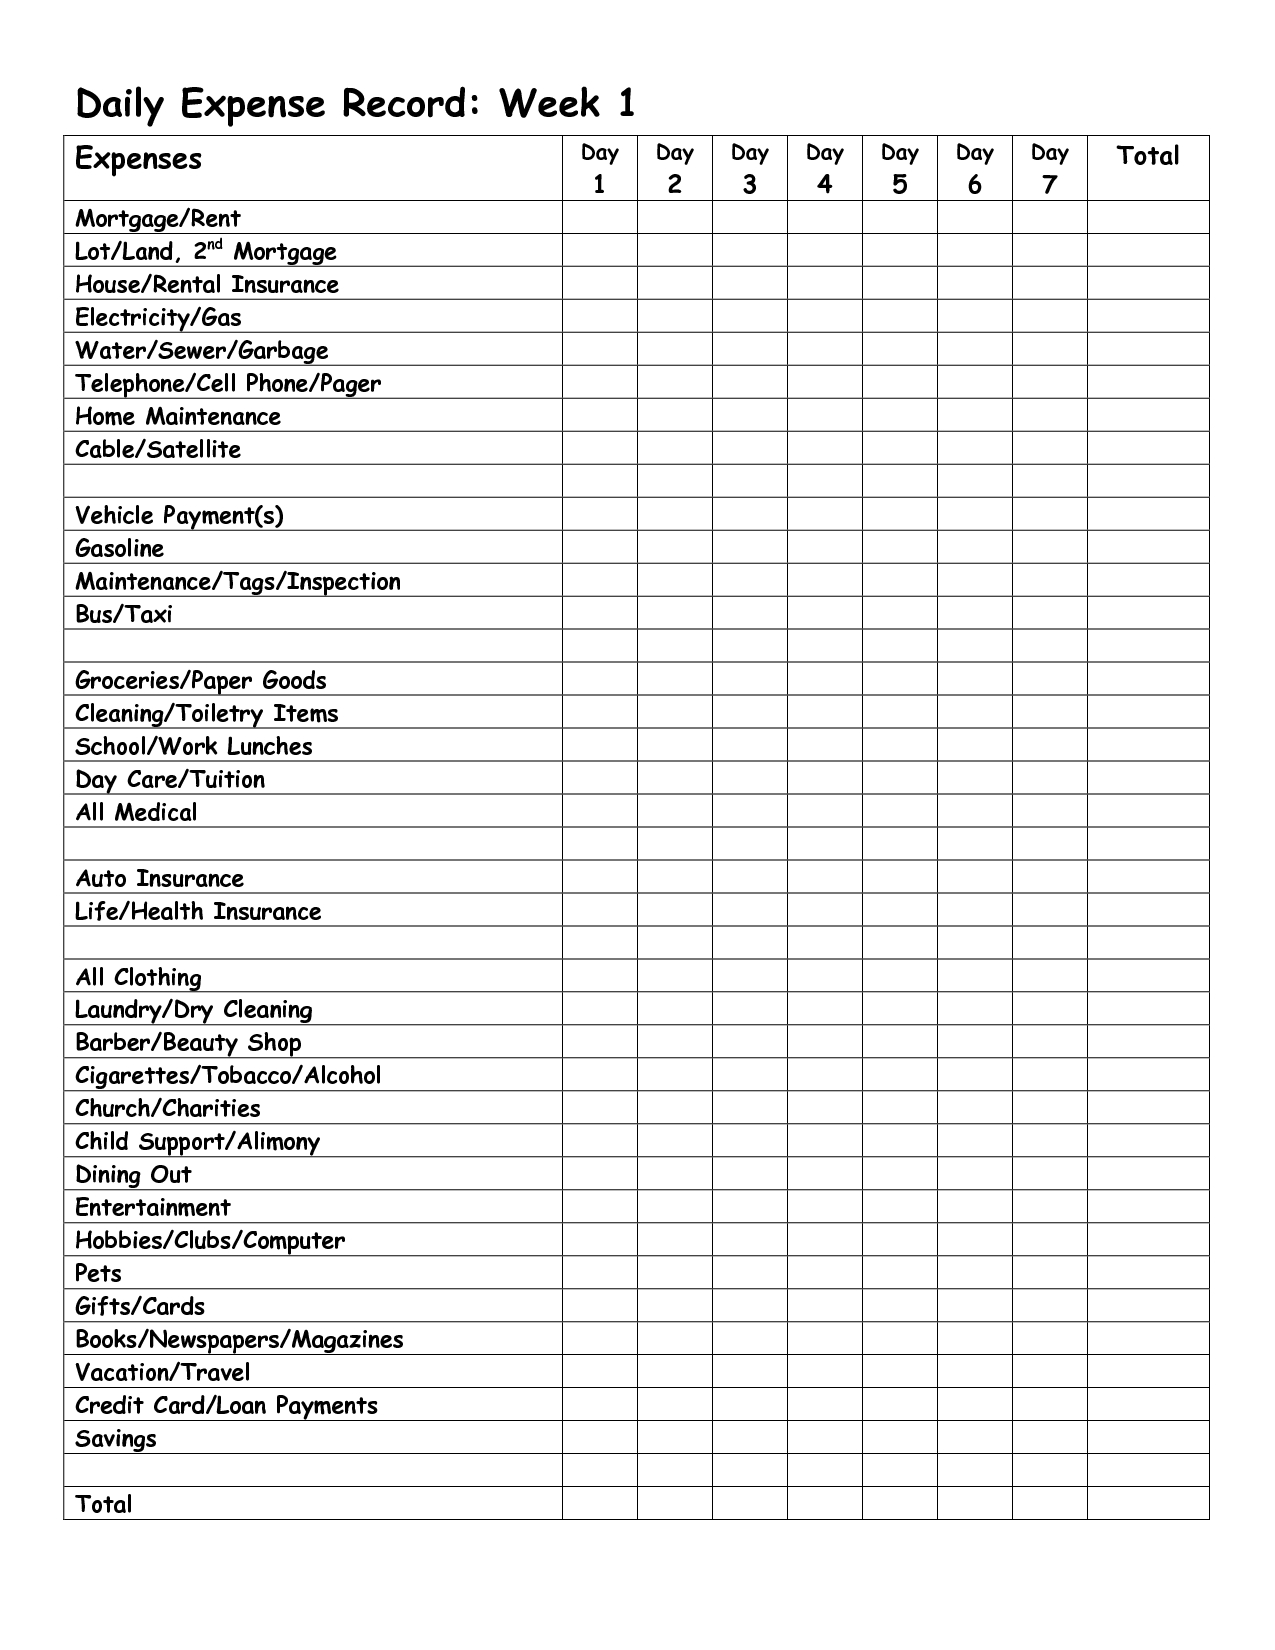 Monthly Expense Report Template  Daily Expense Record Week regarding Daily Expense Report Template